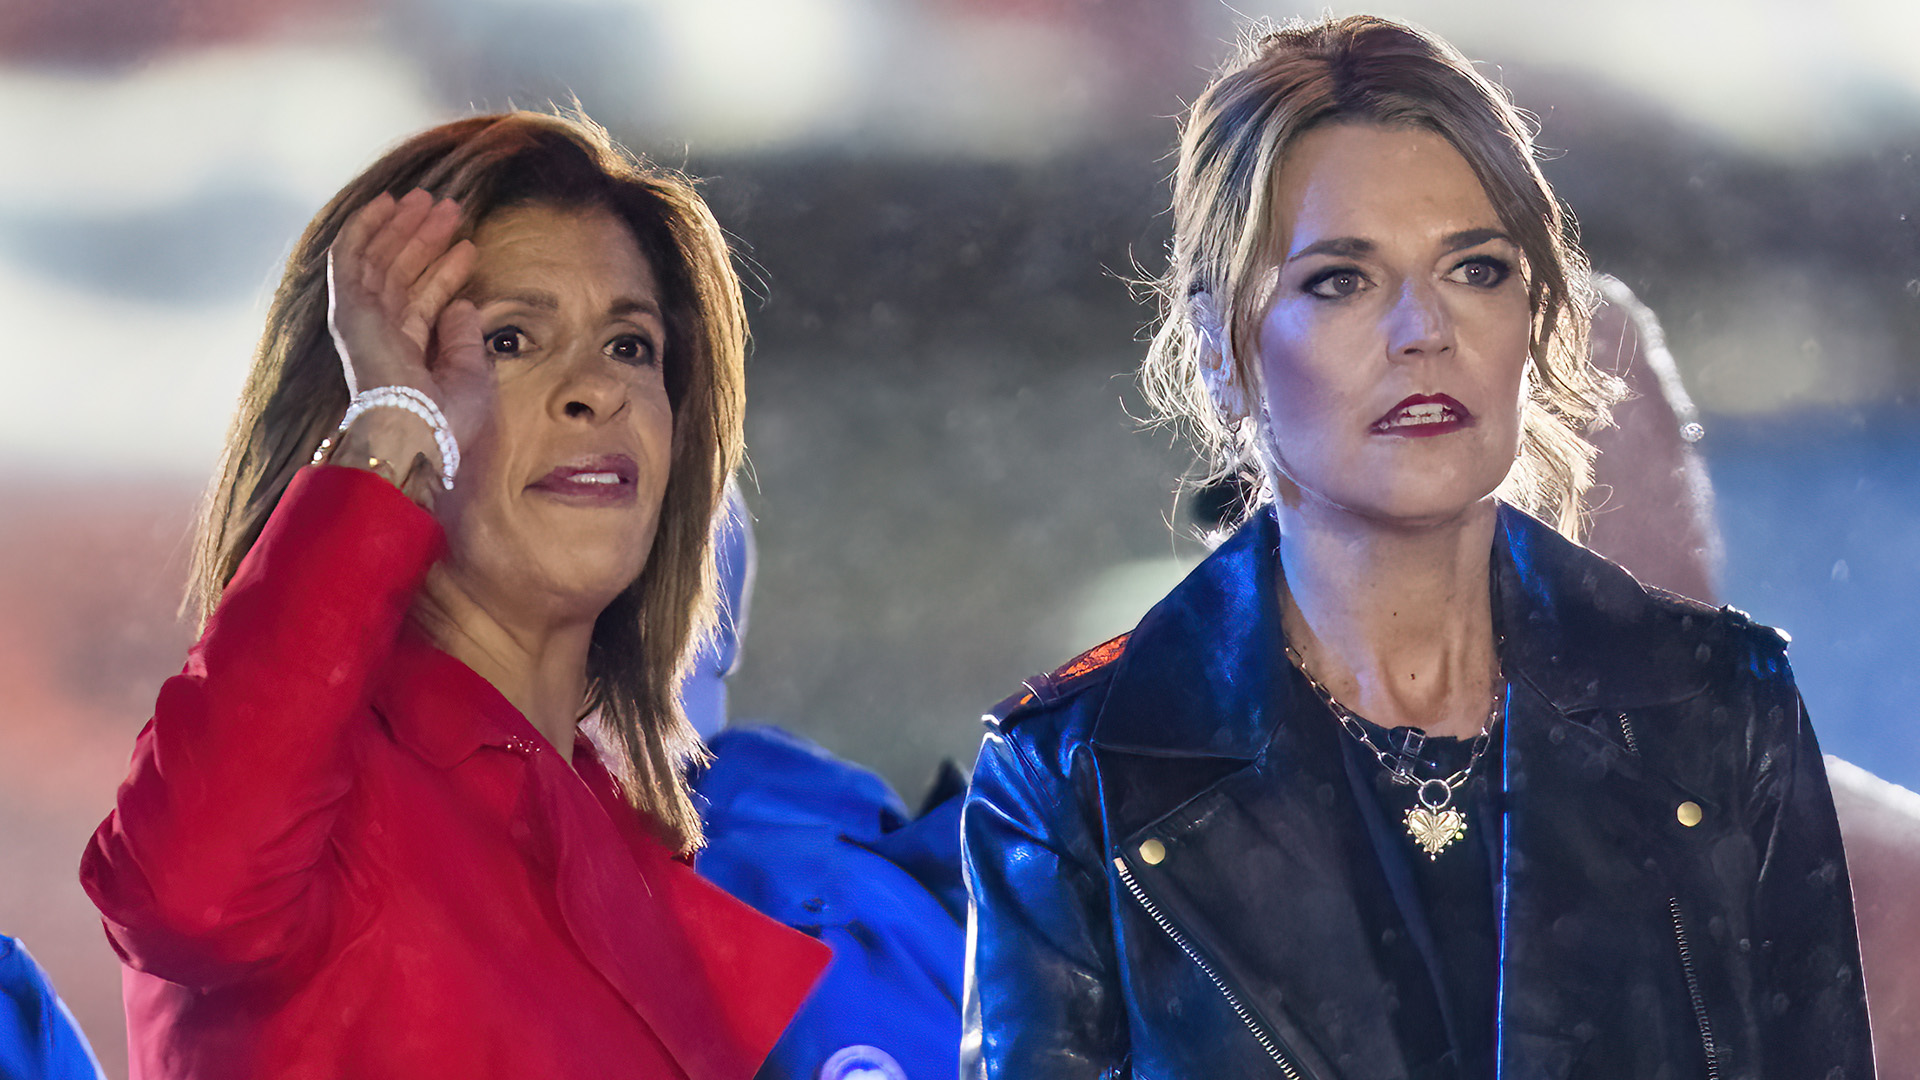 Today’s viewers beg the show to hire Savannah Guthrie as a permanent co-host amid the ‘feuds’ between Hoda and Savannah Kotb